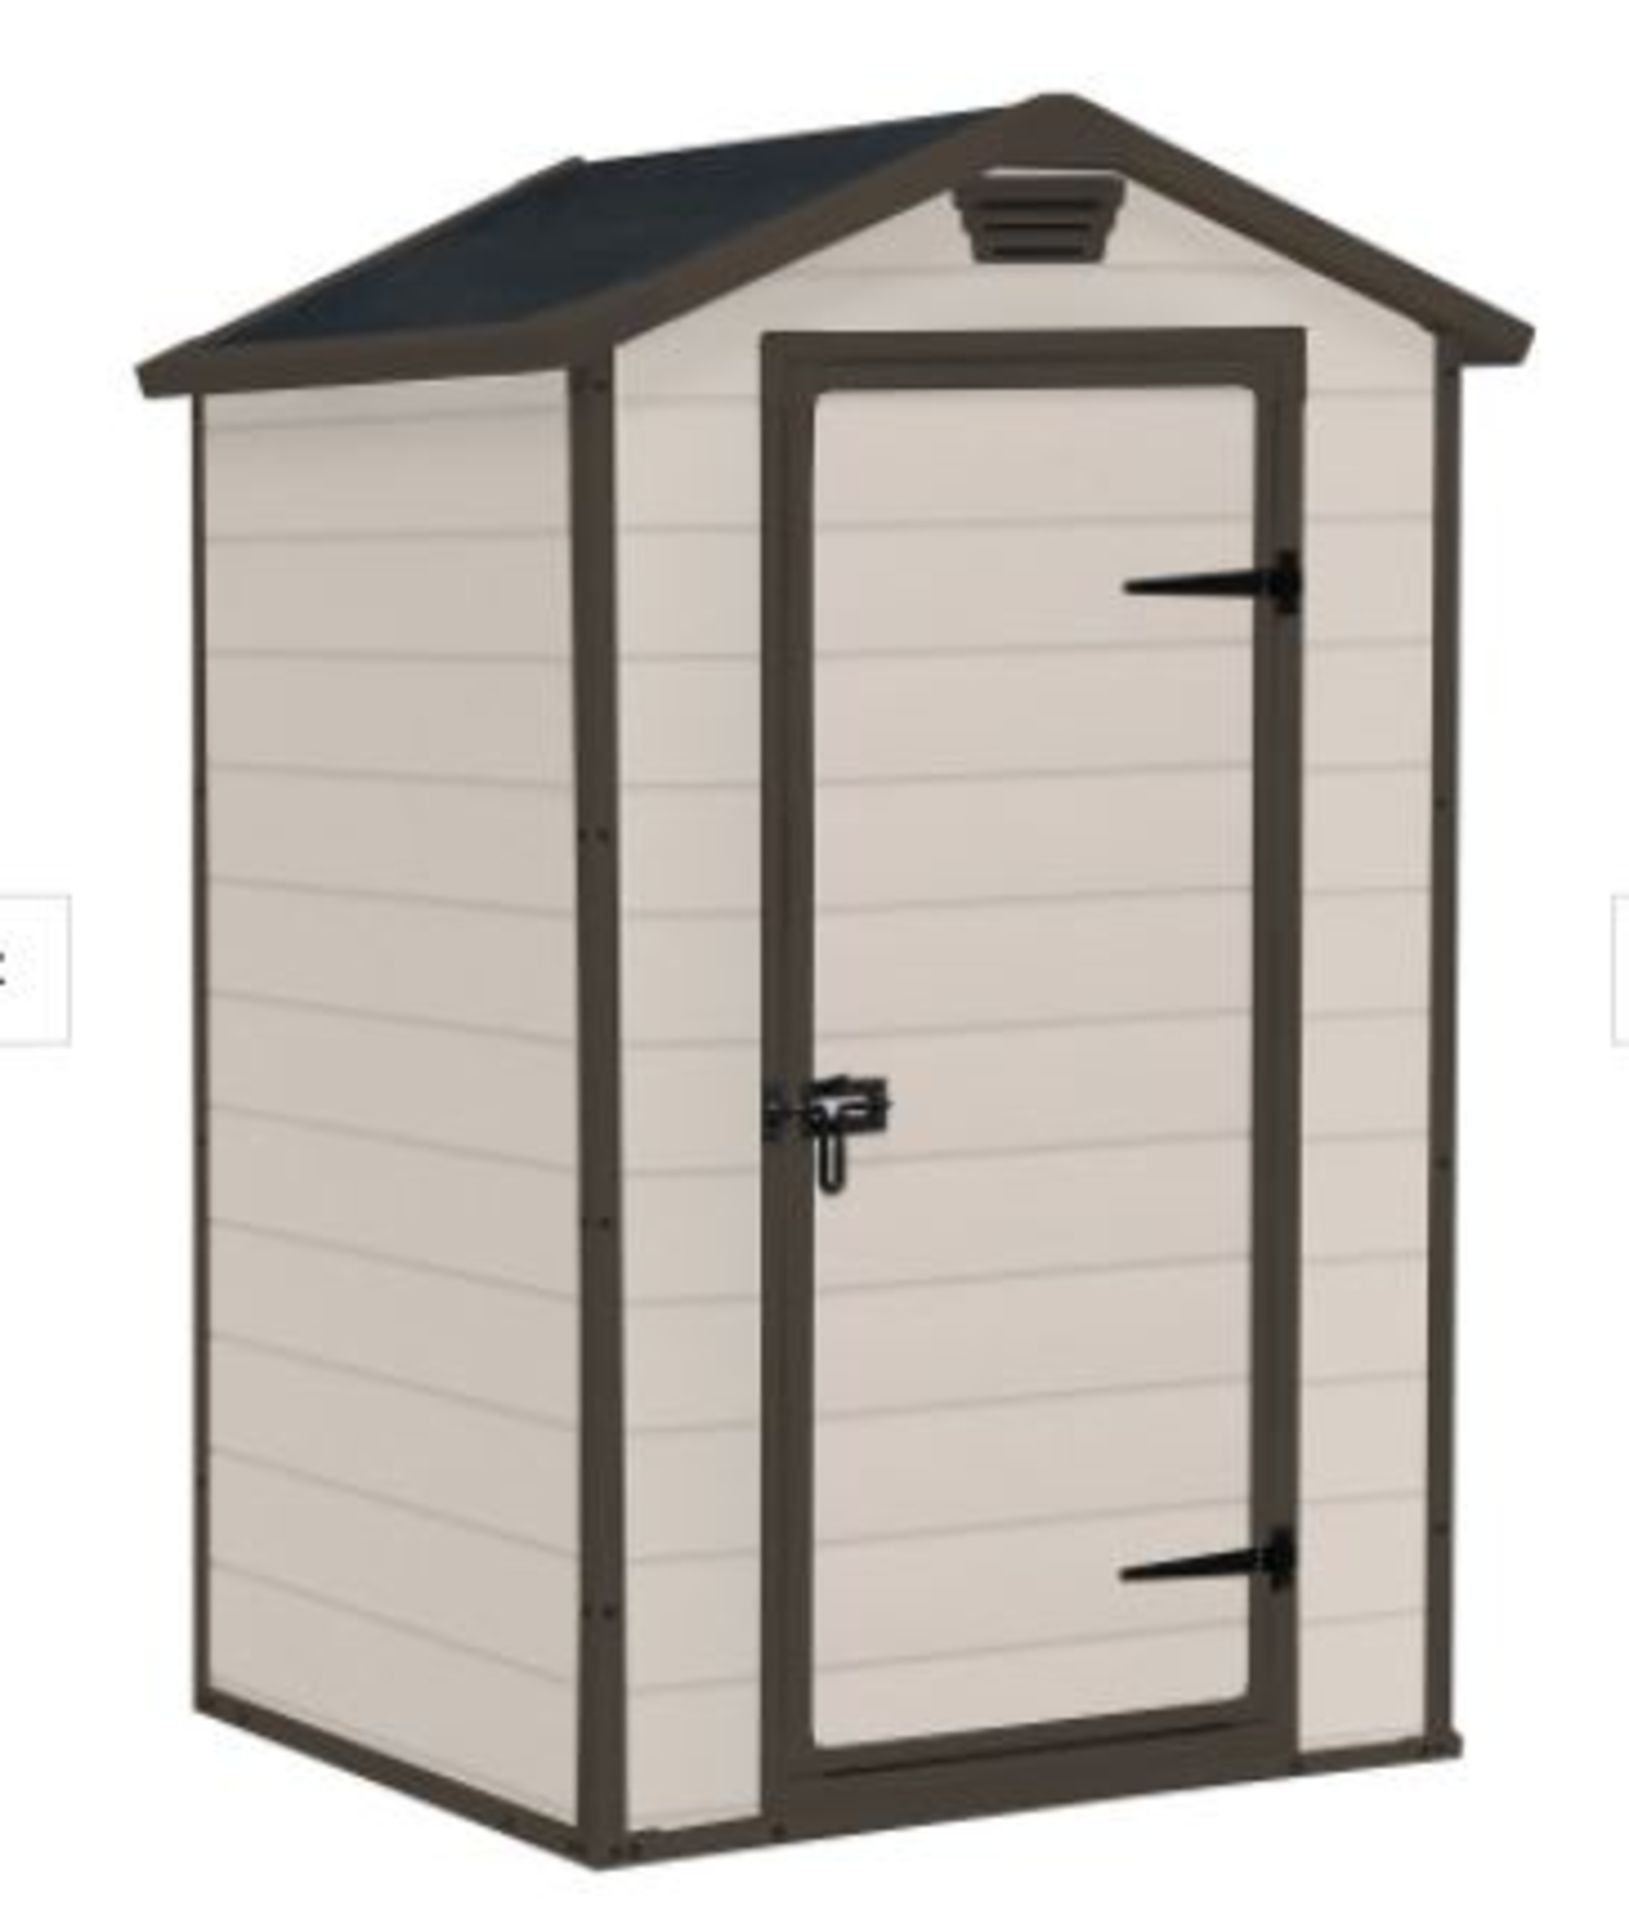 (R10) Garden . 1 X Keter Manor 4 X 3 Maintenance Free Shed (W129 X D103 X H196cm) RRP £240 - Image 2 of 5